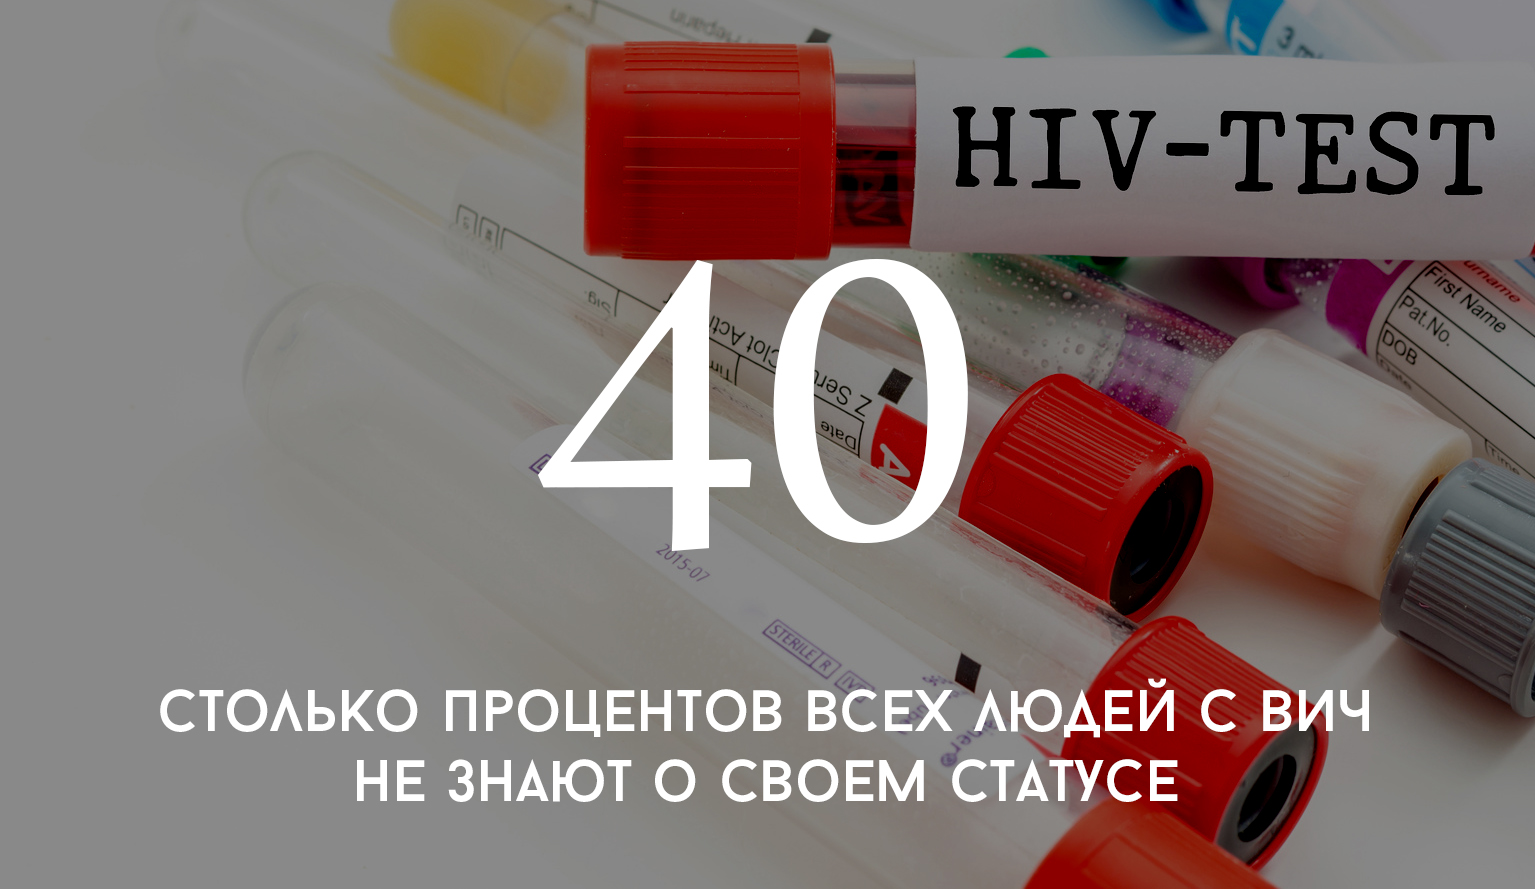 Sample blood collection tube with HIV test.